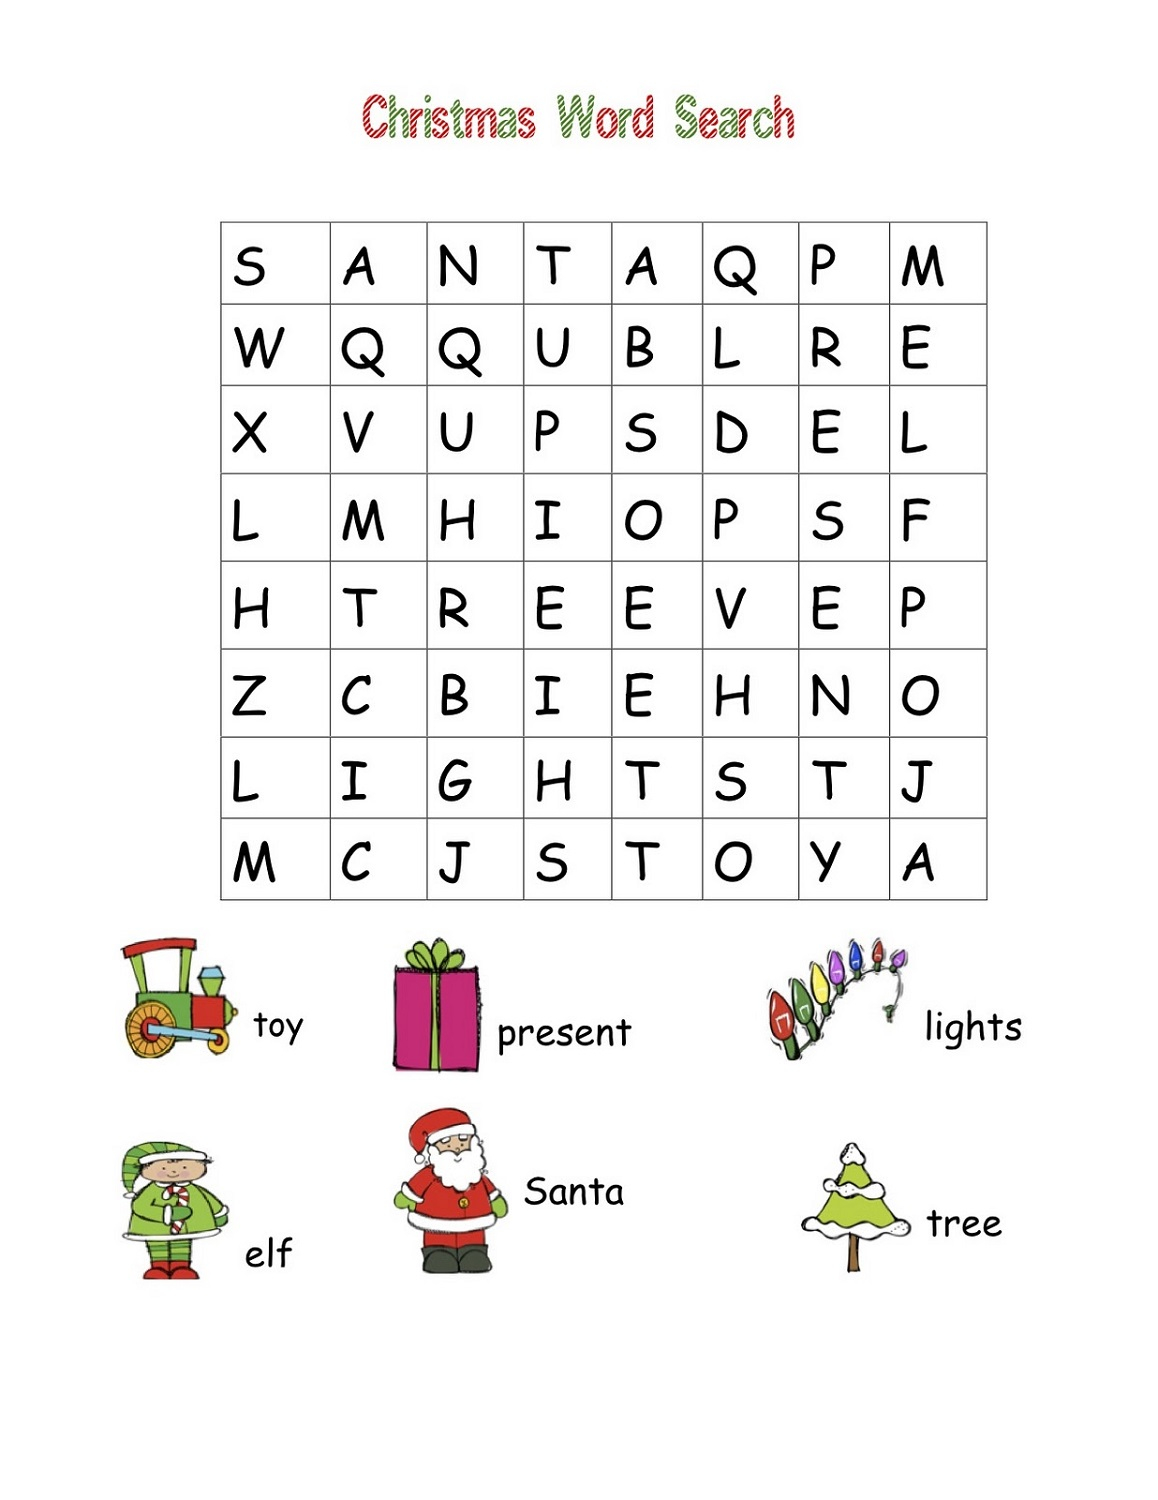 Free Printable Easy Word Search Puzzles